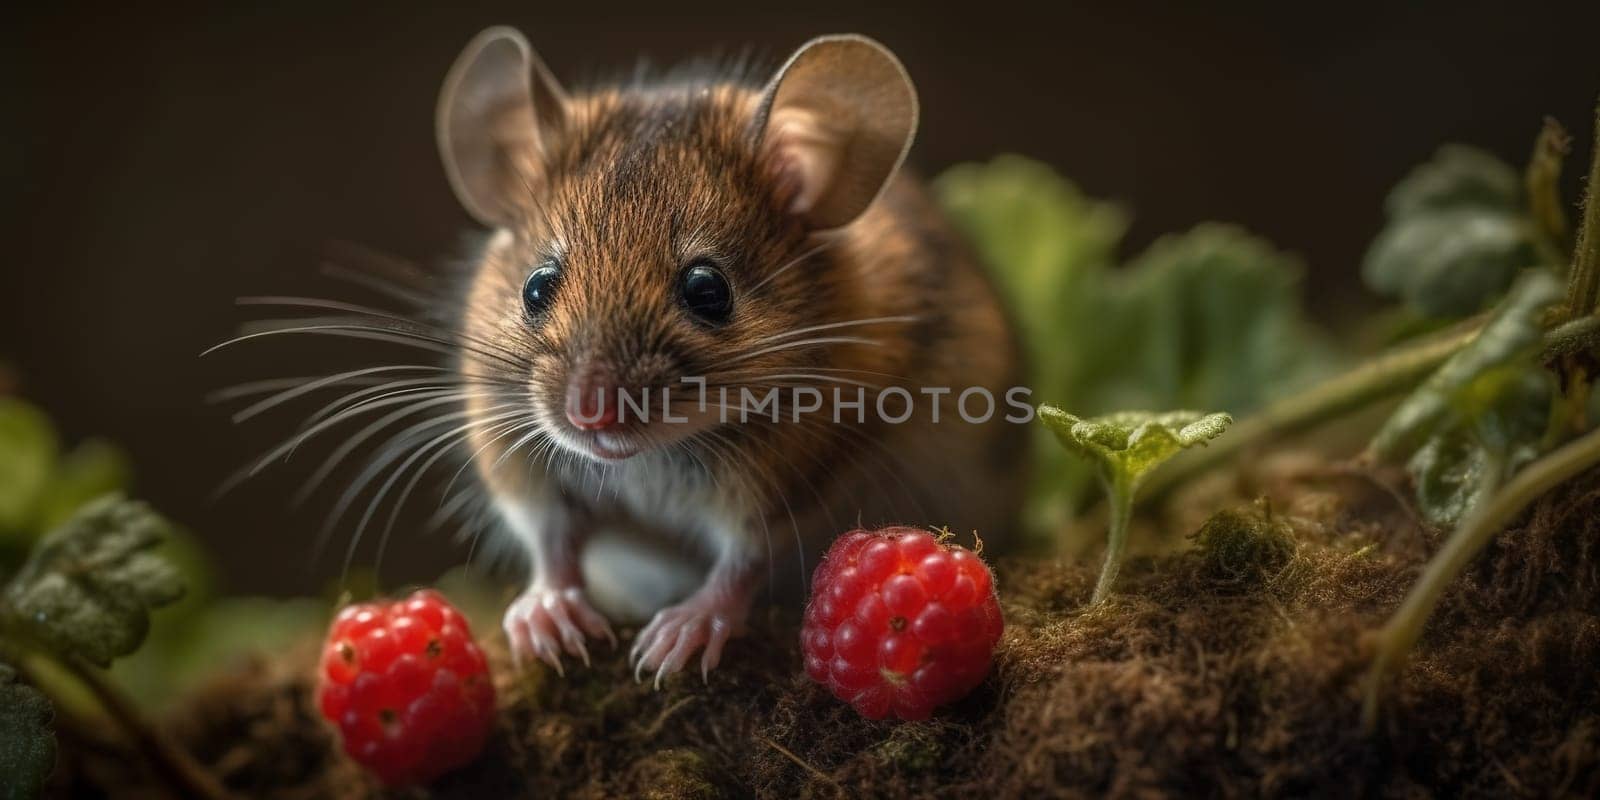 Wild Grey Mouse With Raspberry In The Forest, Close Up View by tan4ikk1